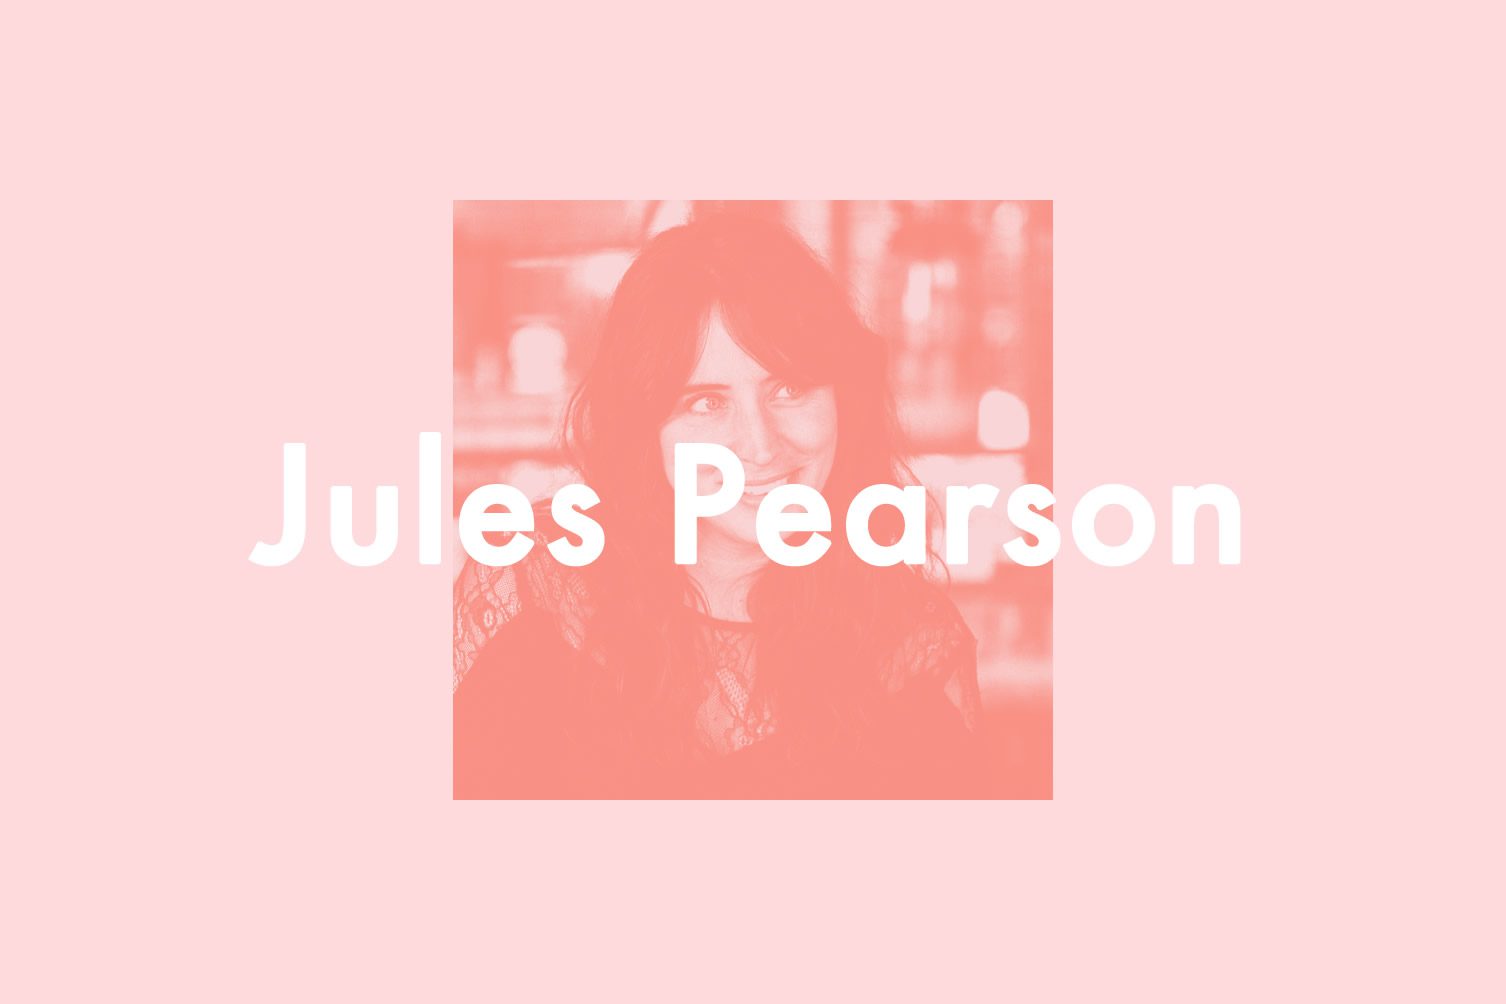 Insider’s Guides: Jules Pearson, London